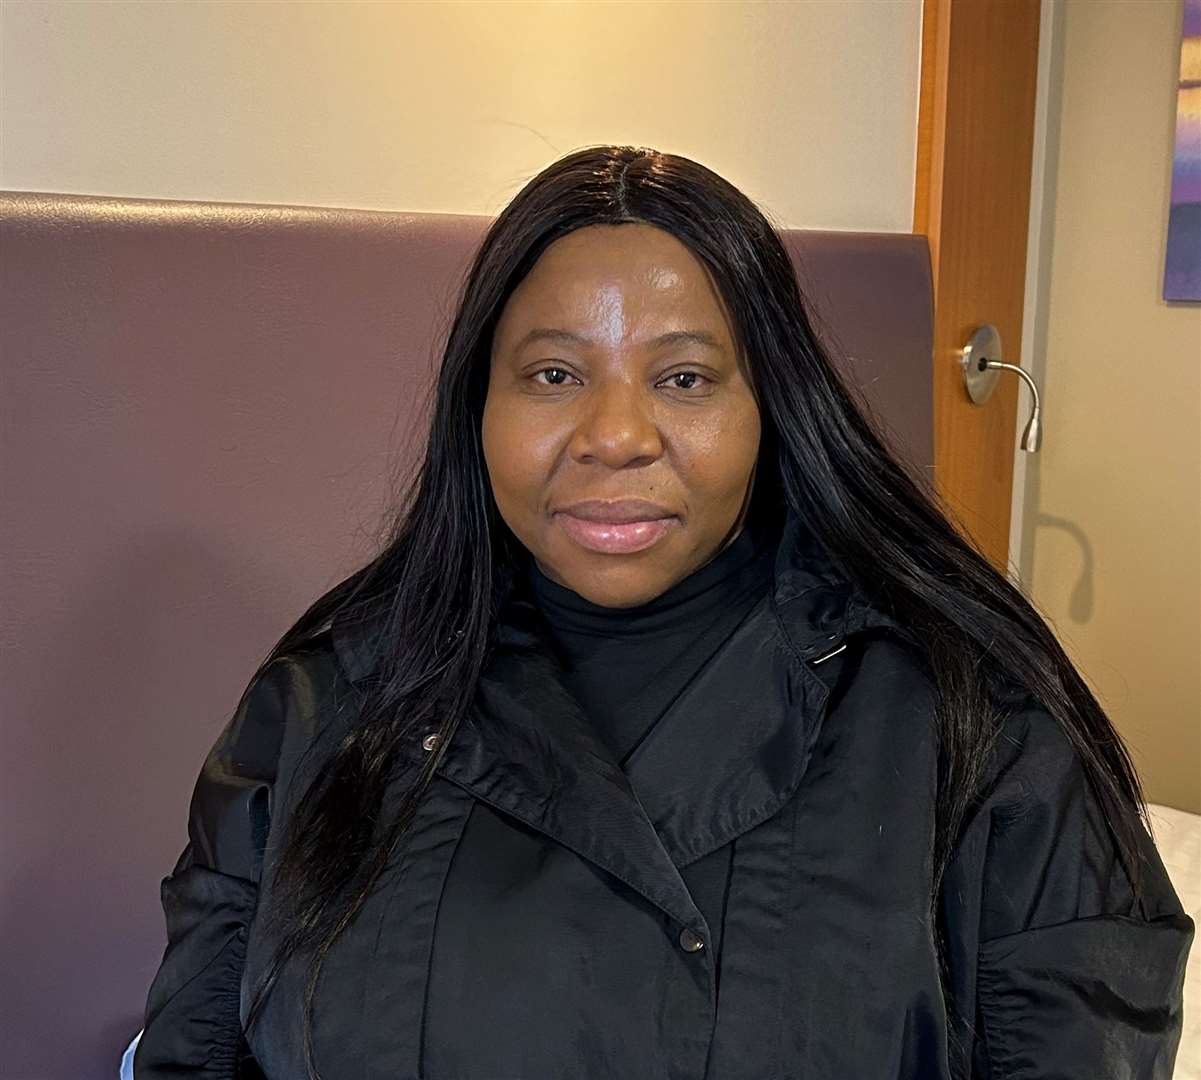 Barbara Motsisi has been living in a Premier Inn following the fire in Herne Bay